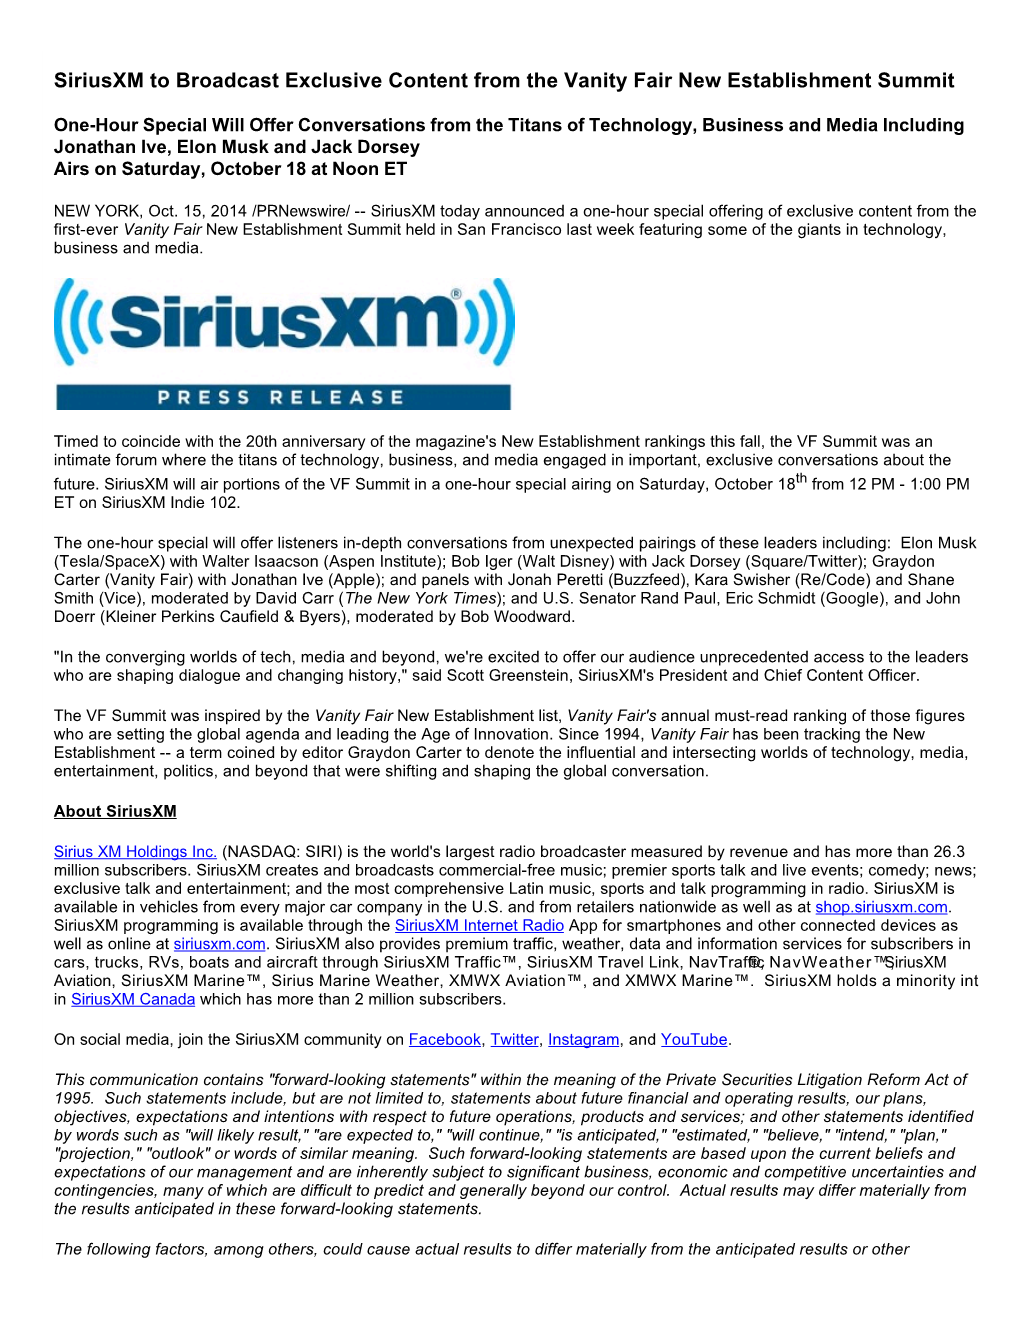 Siriusxm to Broadcast Exclusive Content from the Vanity Fair New Establishment Summit